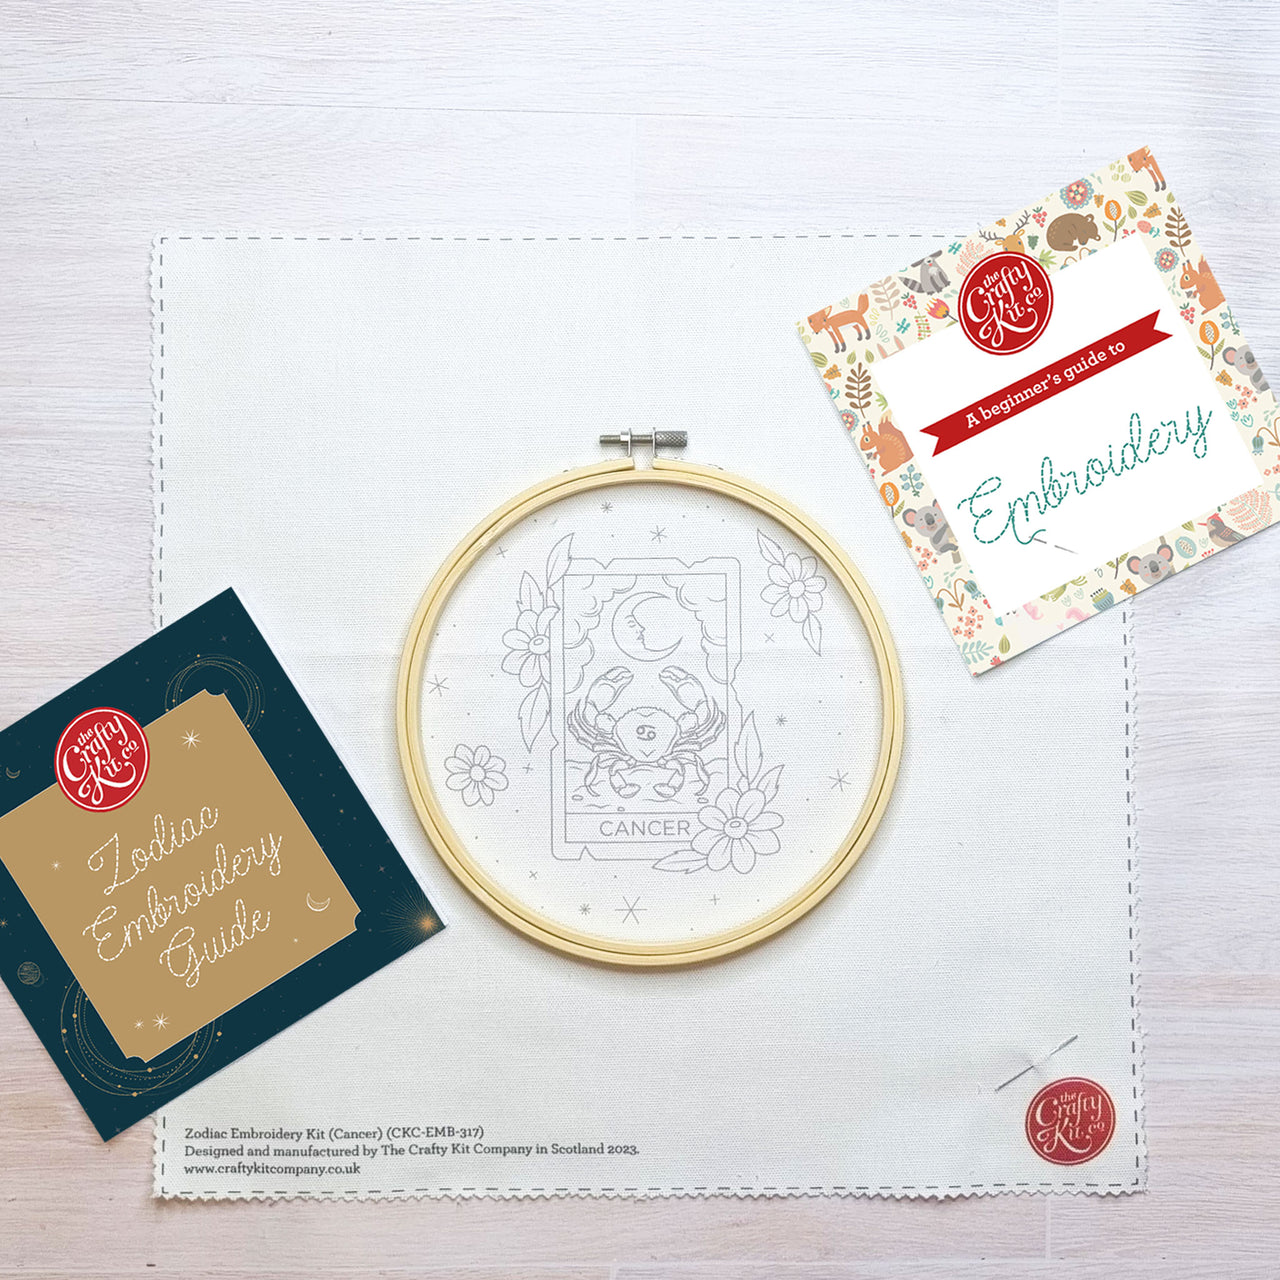 Signs of the Zodiac - Cancer Embroidery Kit